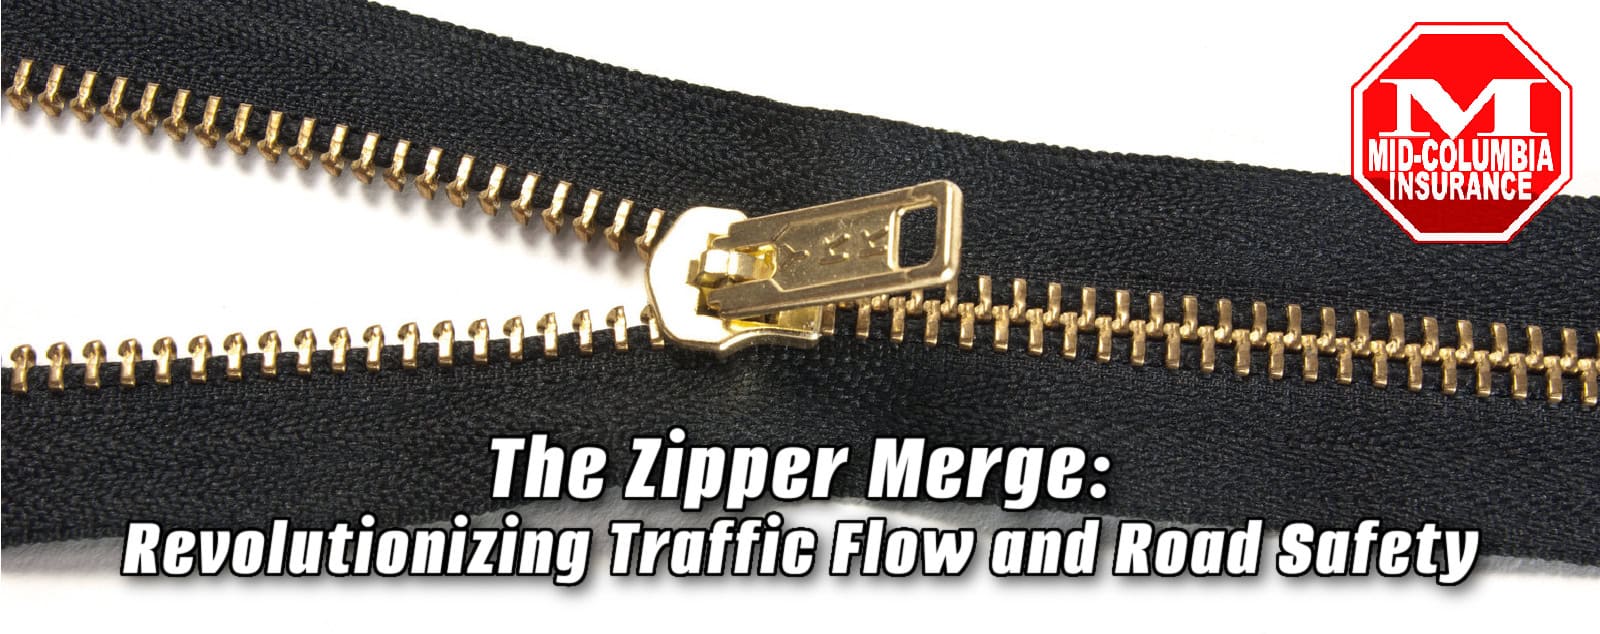 The Zipper Merge Revolutionizing Traffic Flow And Road Safety - black color zipper on white background